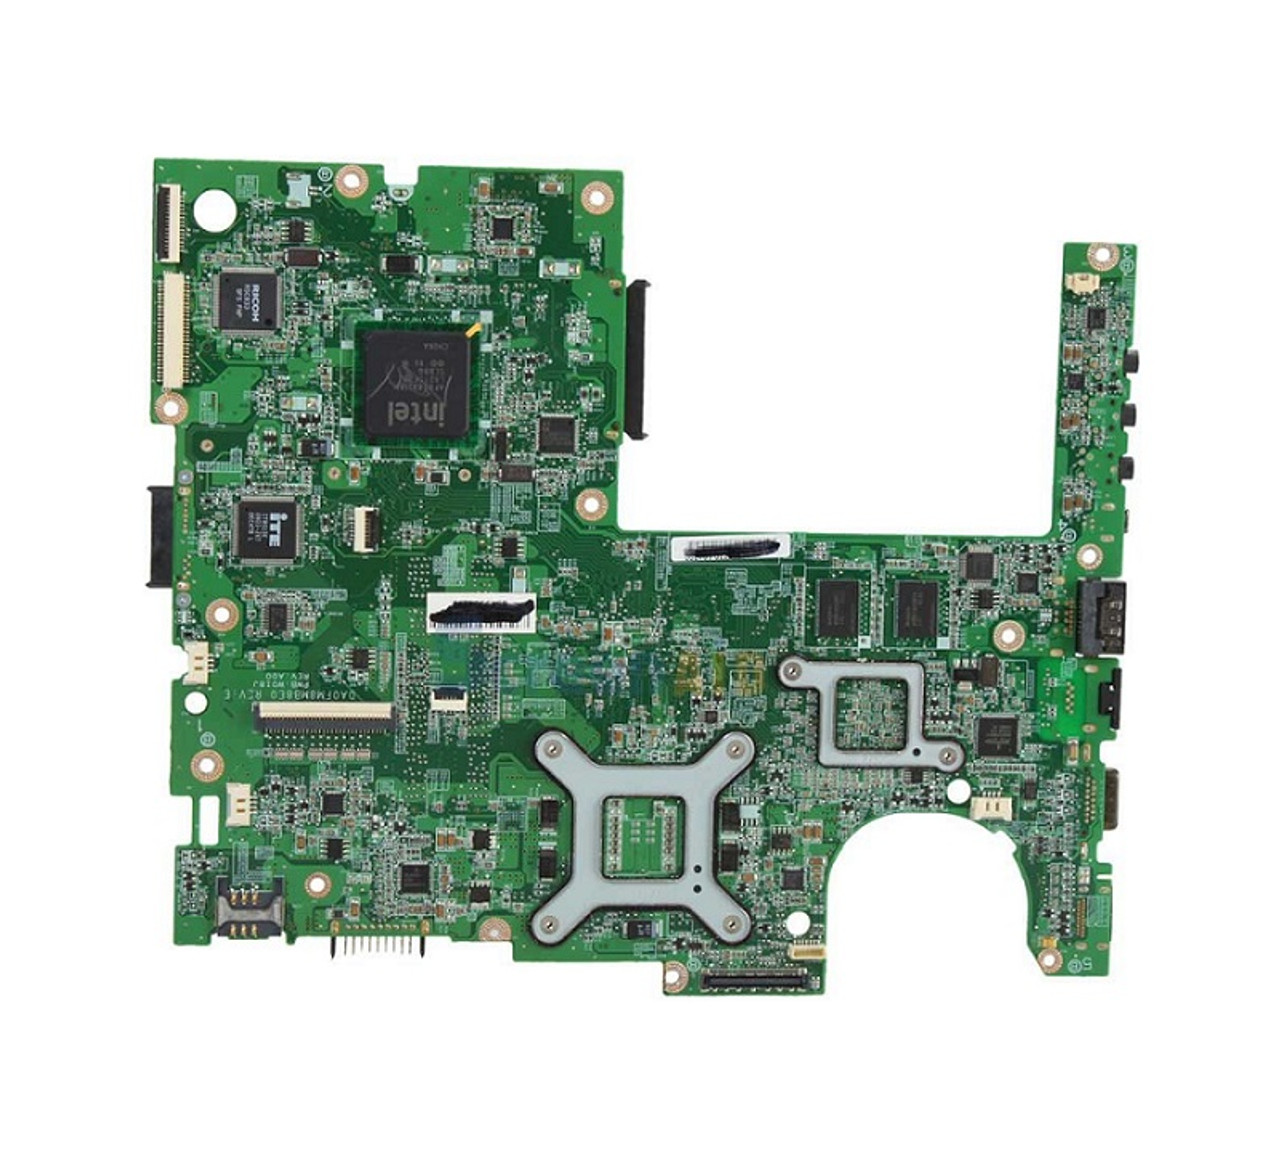 0DC162 - Dell Motherboard for Inspiron 700M/710M Laptop